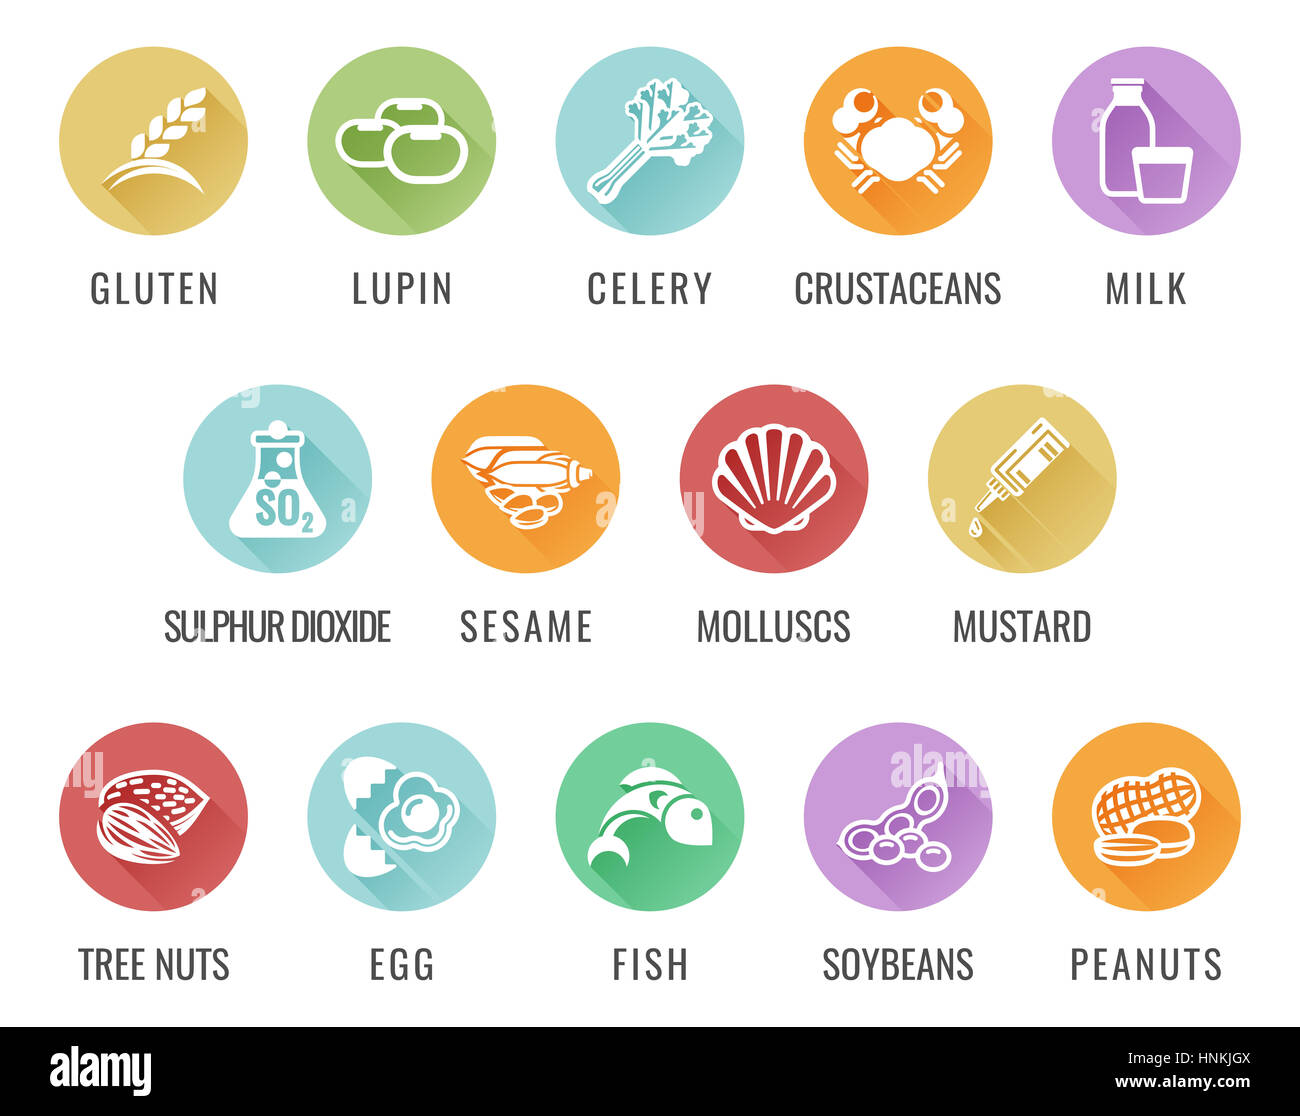 Food allergy icons including the 14 allergies outlined by the EU Food Information for Consumers Regulation EFSA European Food Safety Authority Annex I Stock Photo